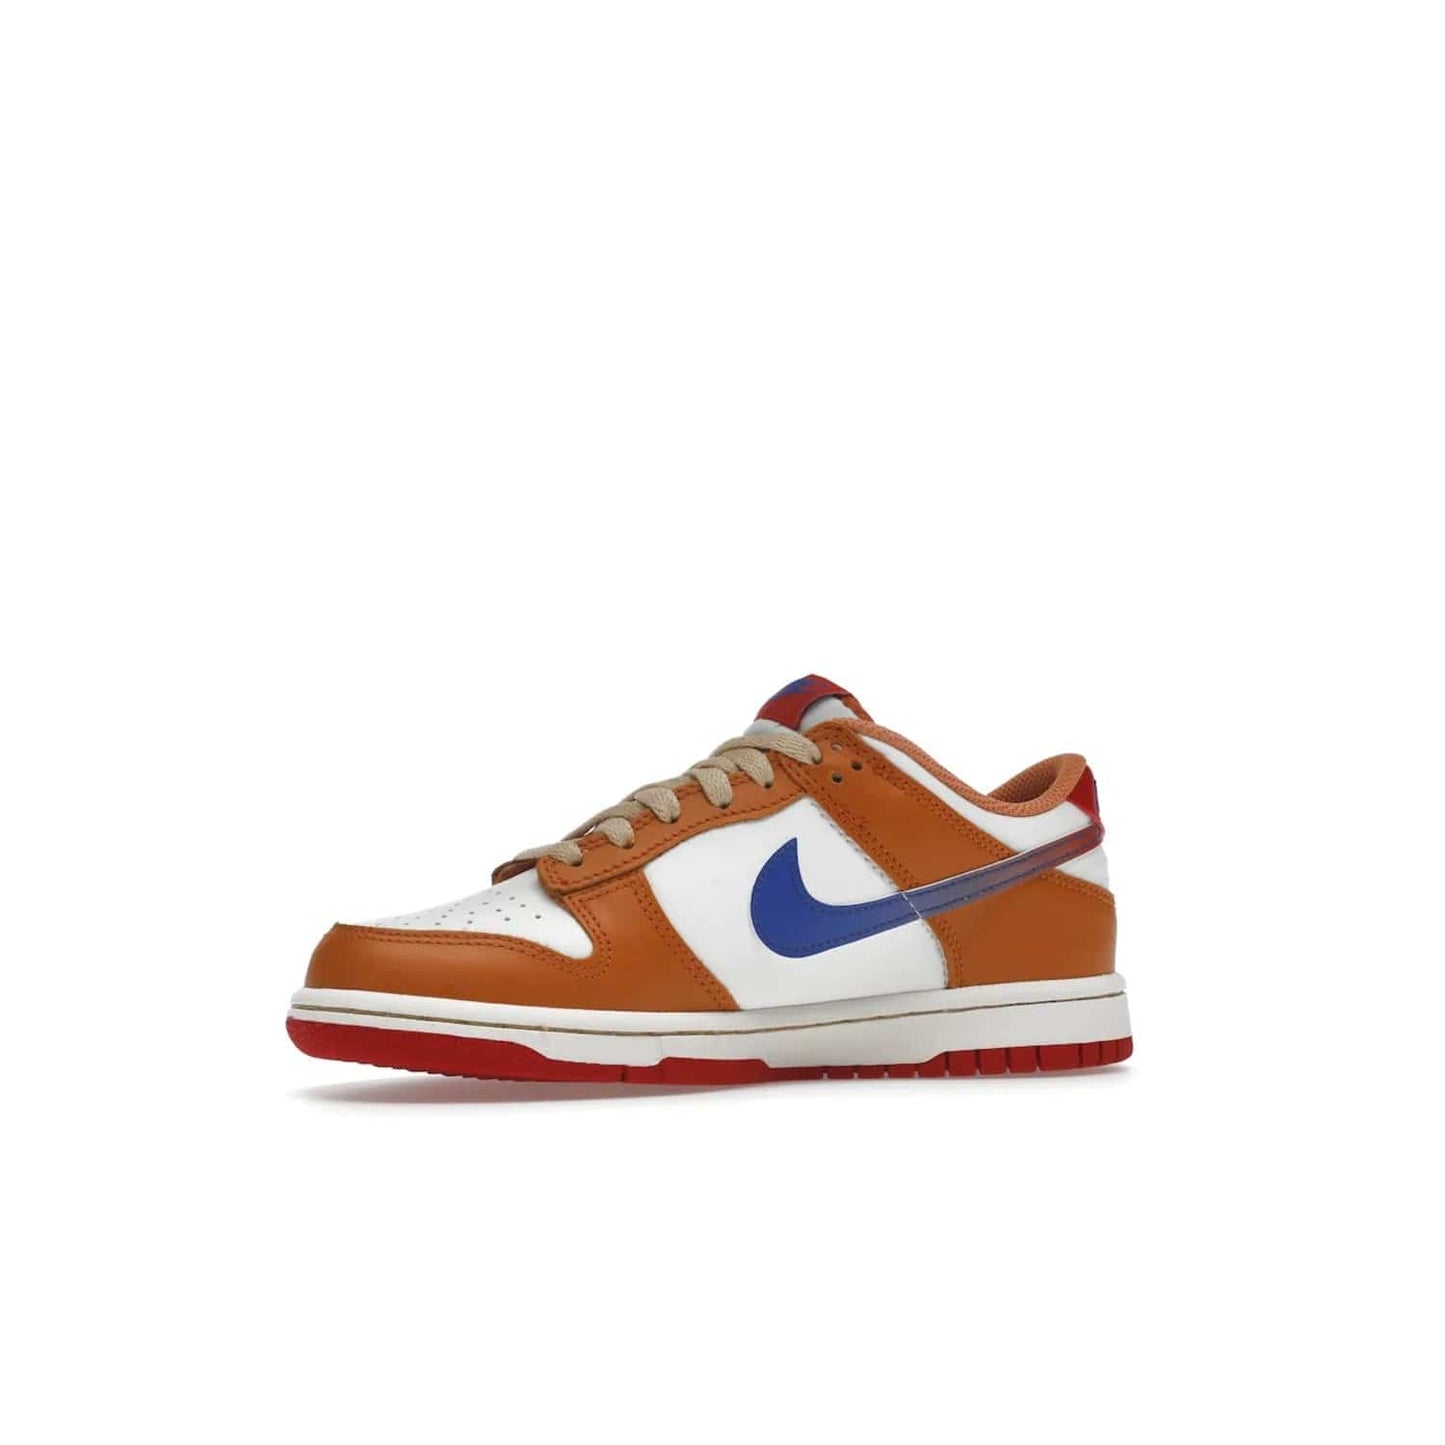 Nike Dunk Low Hot Curry Game Royal (GS) - Image 17 - Only at www.BallersClubKickz.com - Shop the Nike Dunk Low Hot Curry Game Royal GS and rock a classic color scheme to represent the New York Knicks. Featuring a smooth leather upper, retro Nike branding and a low cut collar and rubber cup sole for comfort and protection. Get yours on September 7 at $85.